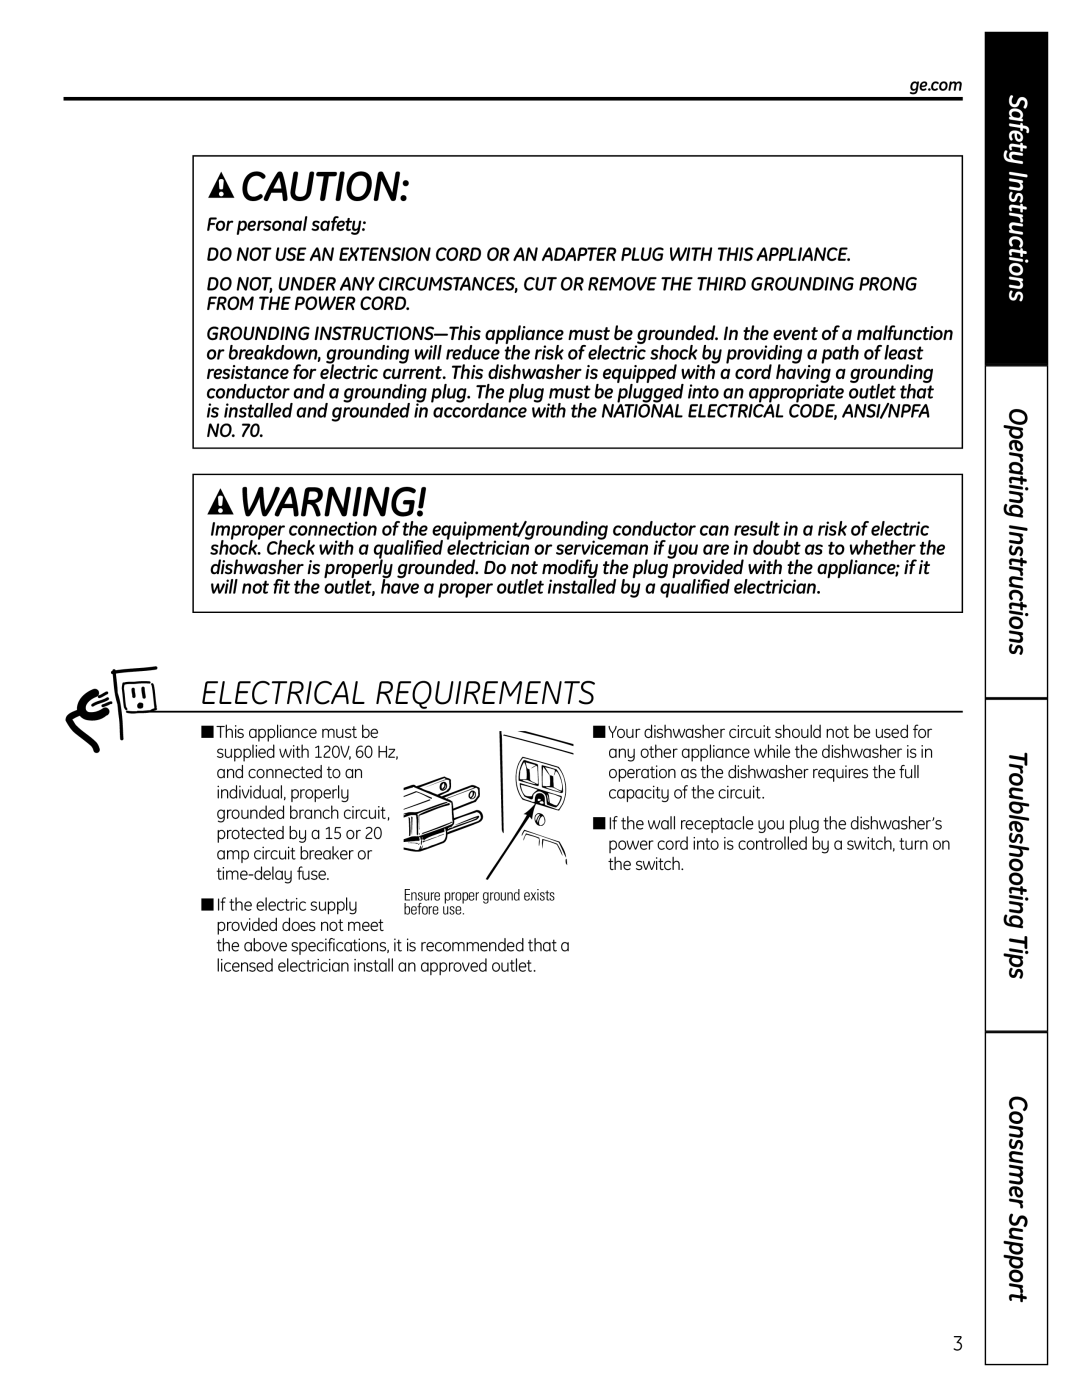 GE GLC4100 Electrical Requirements, Troubleshooting Tips Consumer Support, Safety Instructions, Operating Instructions 